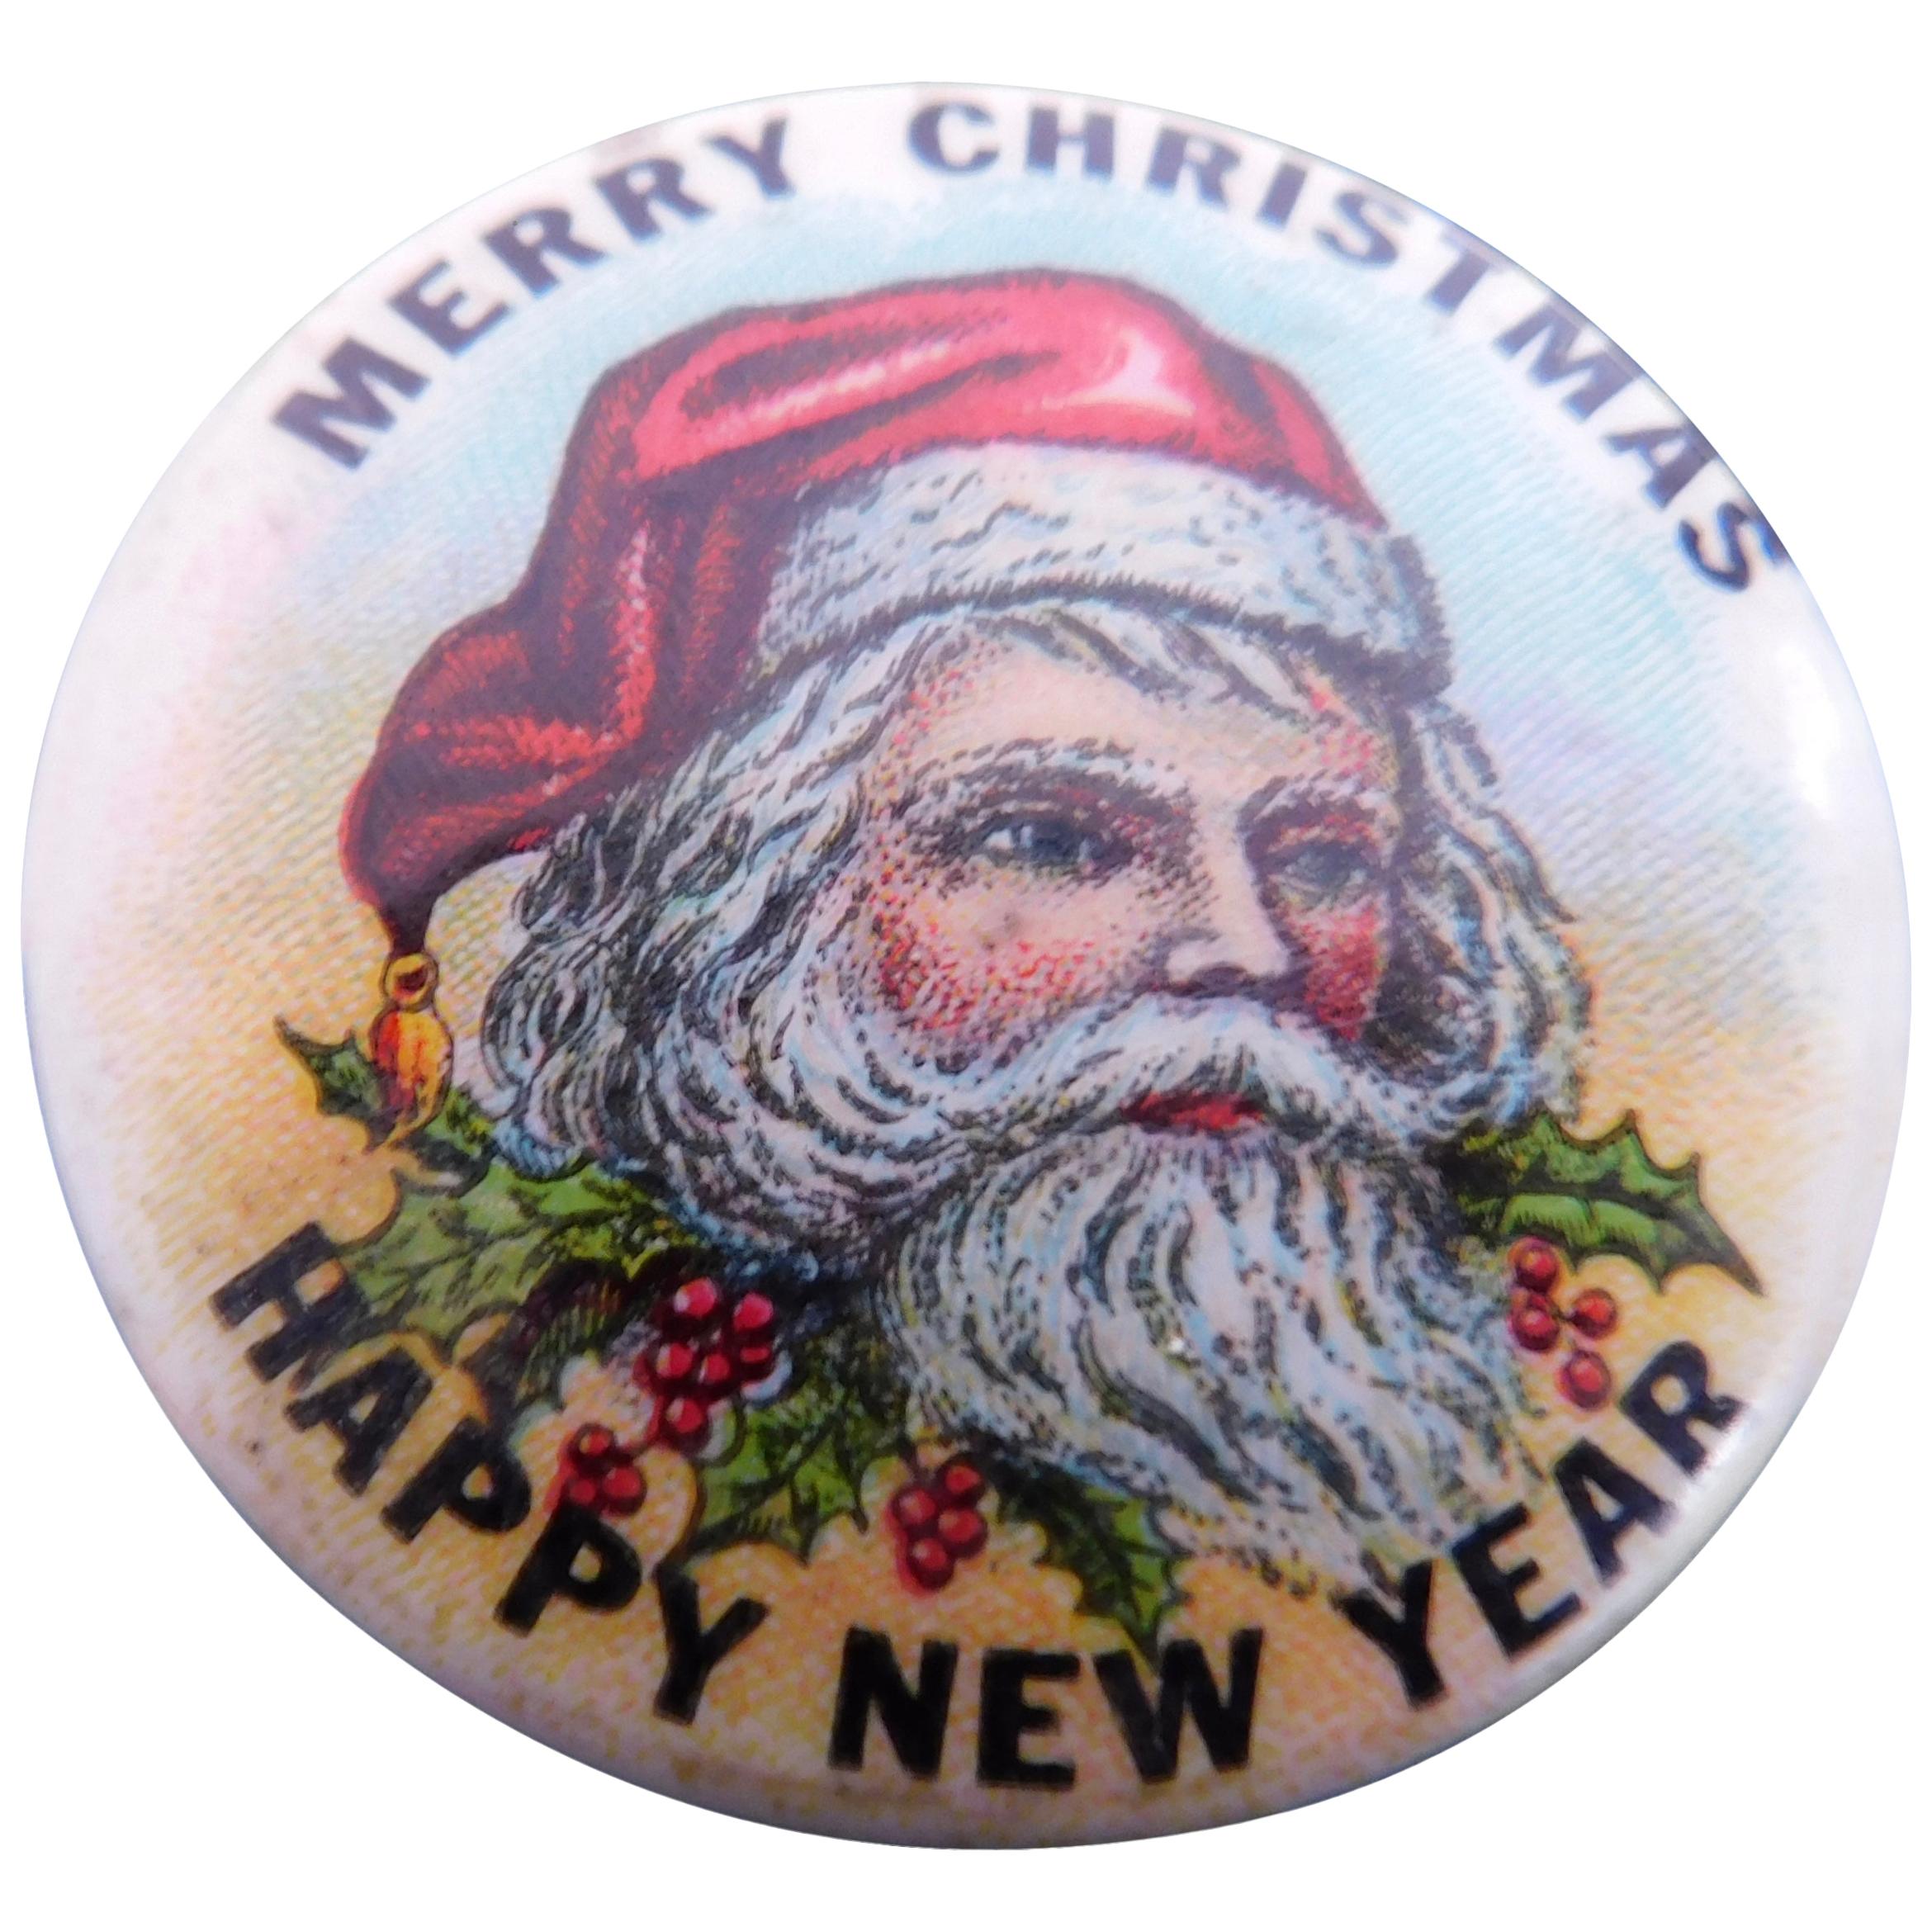 Vintage American Merry Christmas/ Happy New Year  Pin/Brooch For Sale